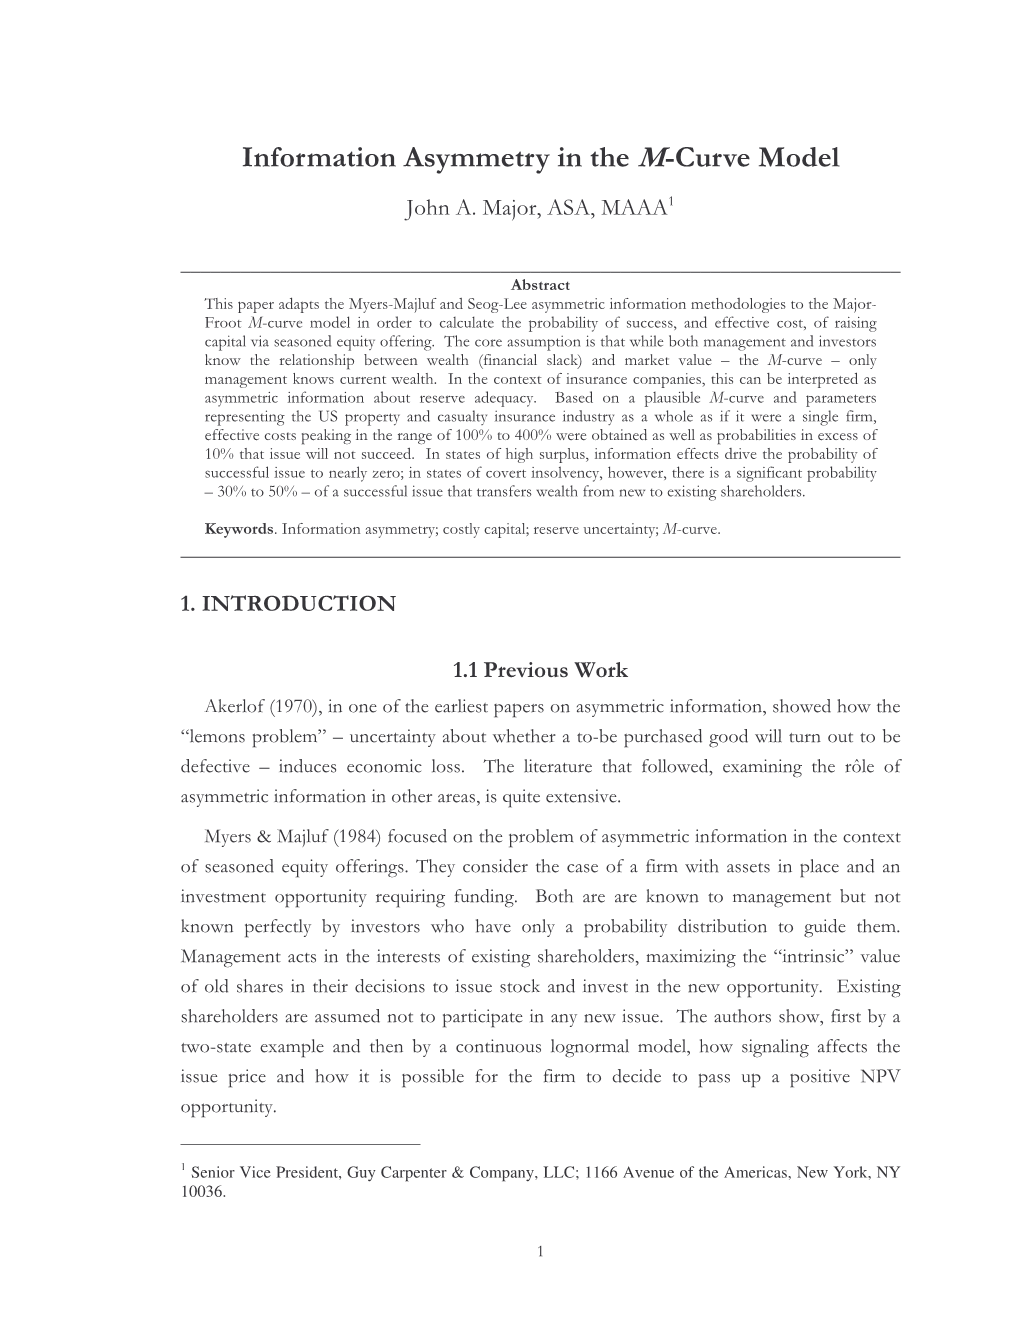 Information Asymmetry in the M-Curve Model